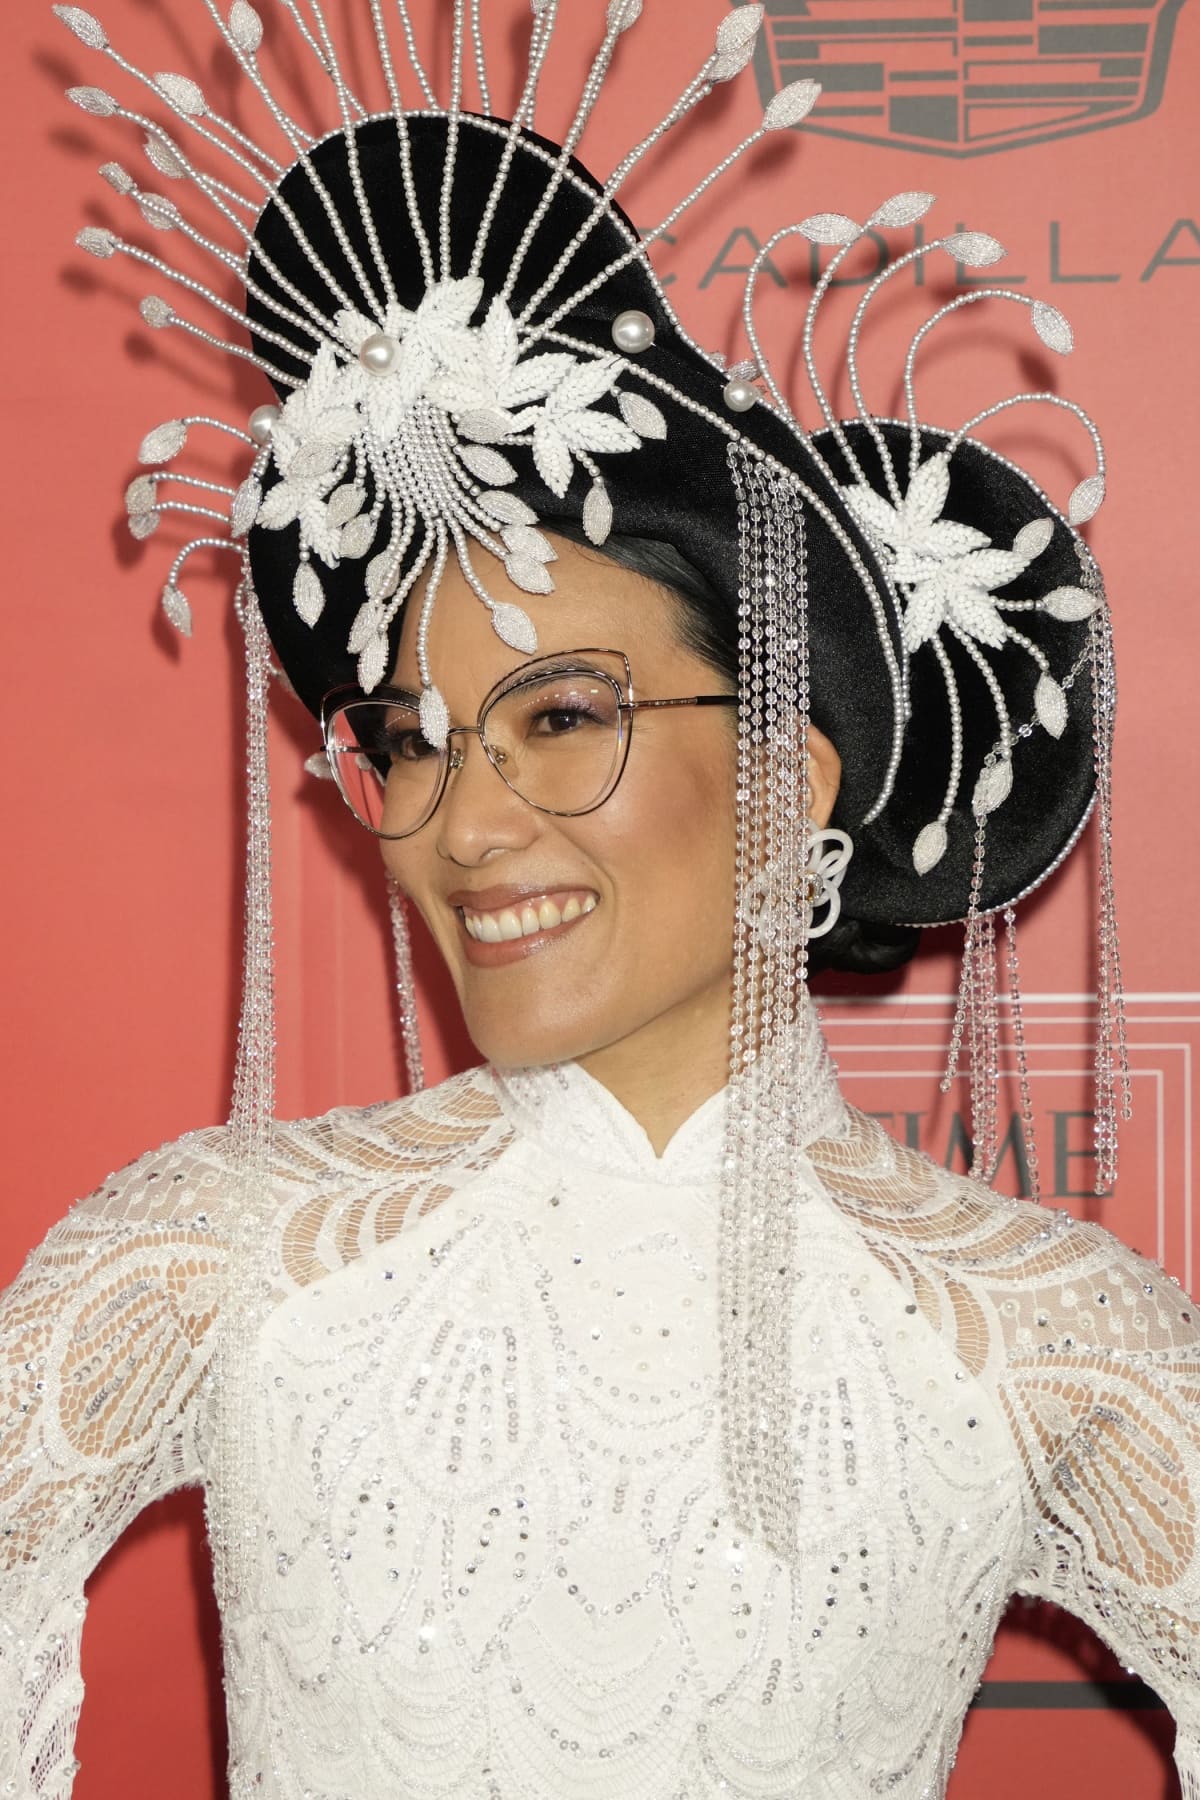 Ali Wong also wore a complementary headpiece with exquisite detailing and a stunning beauty look courtesy of her glam team: Daniel Martin and Tommy Buckett